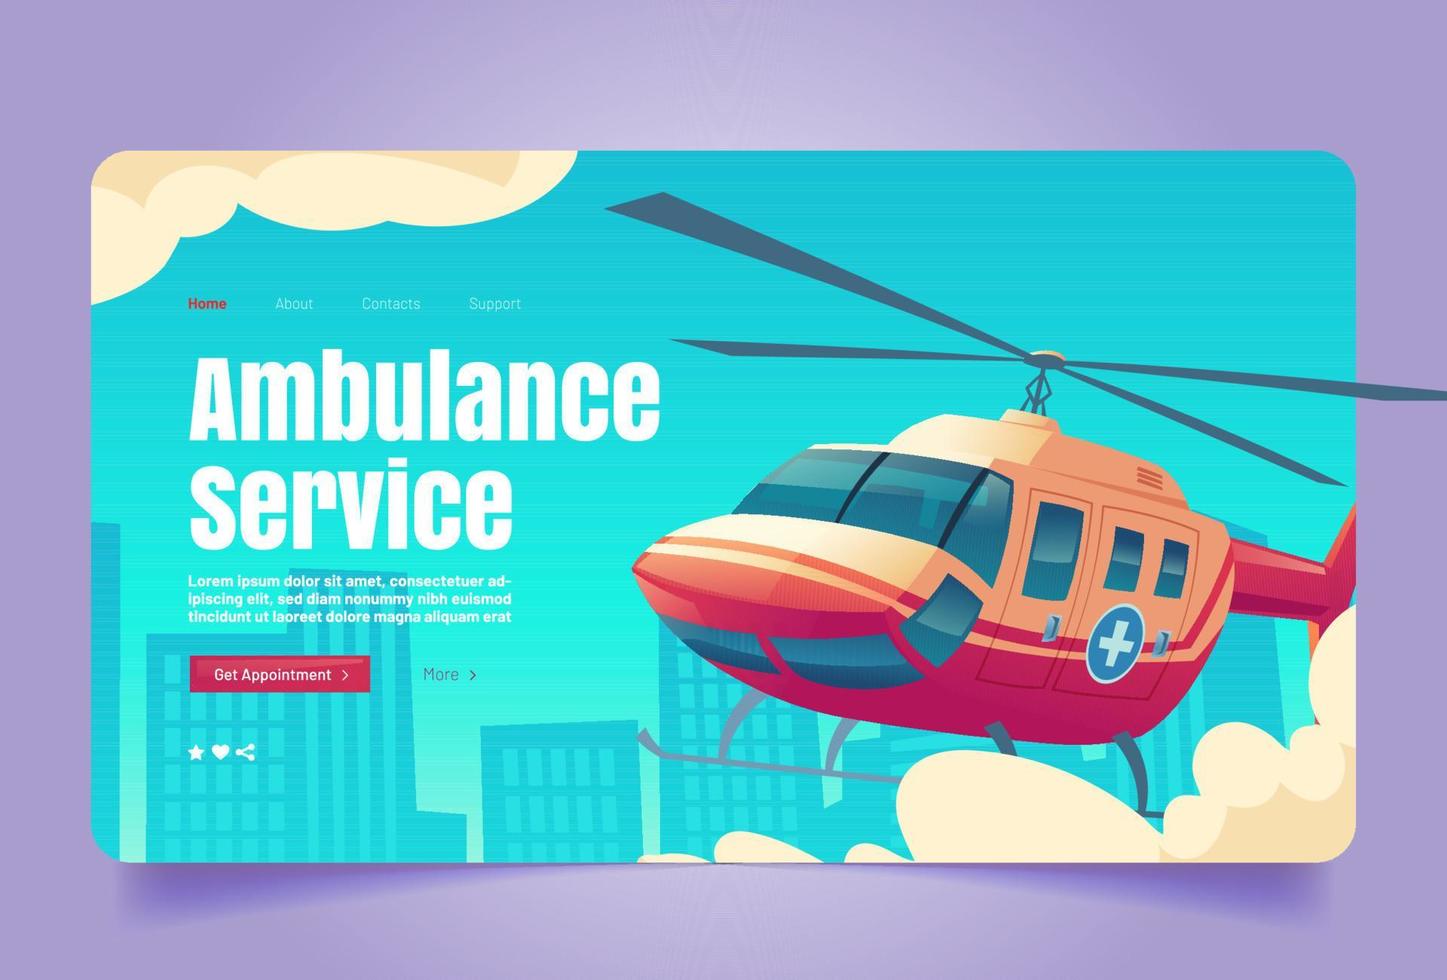 Ambulance service banner with red helicopter vector